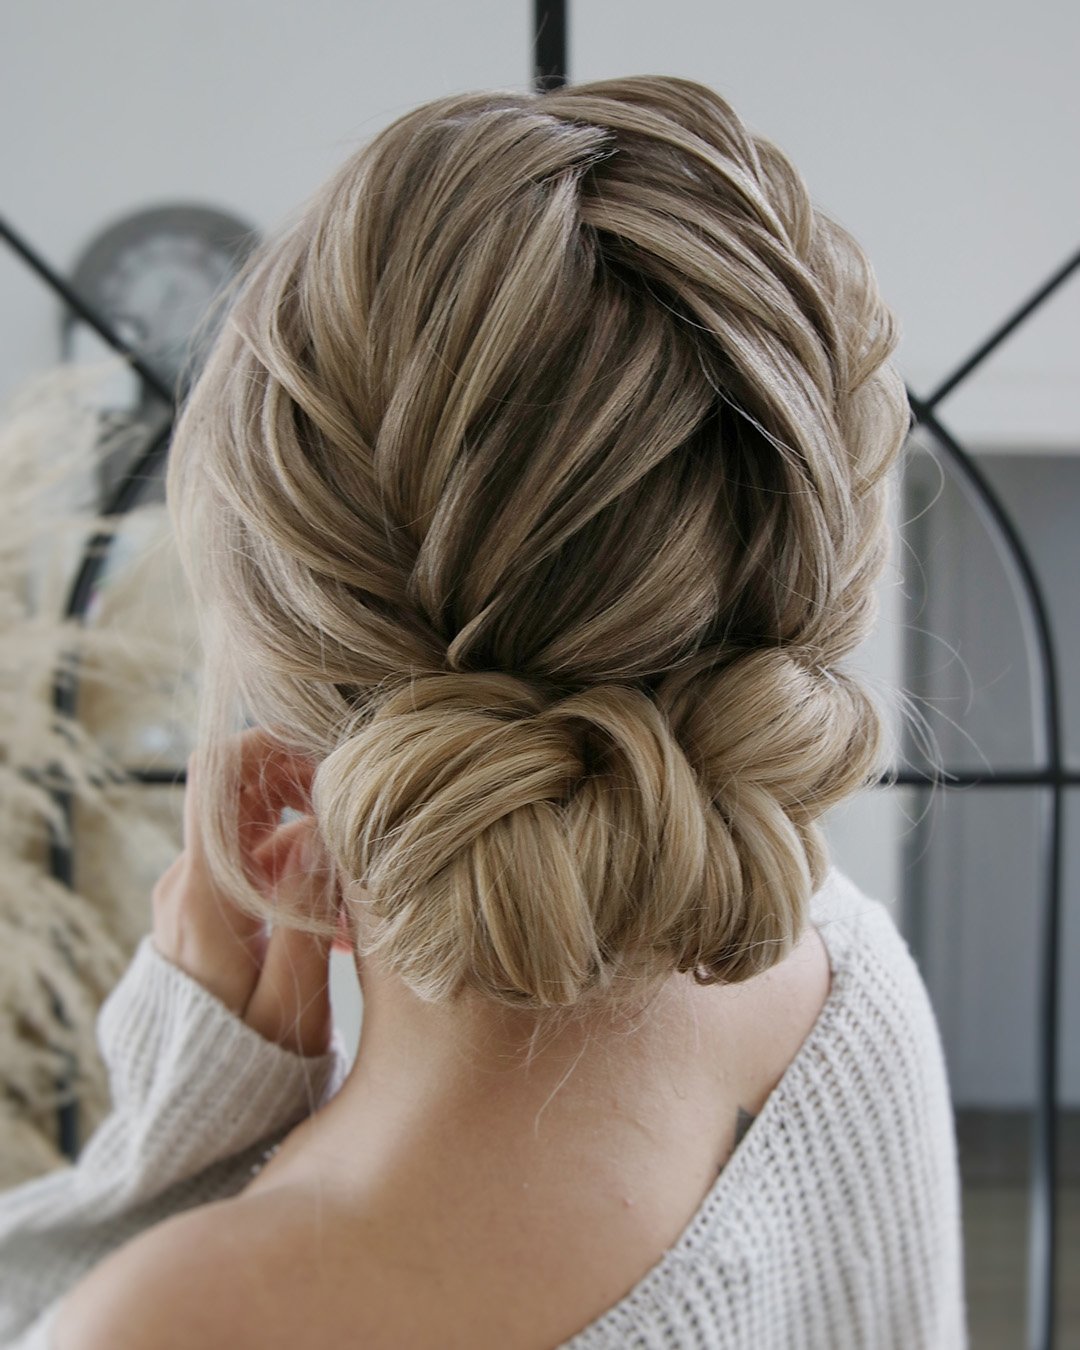 wedding updos for long hair textured pair of low buns juliafratichelli